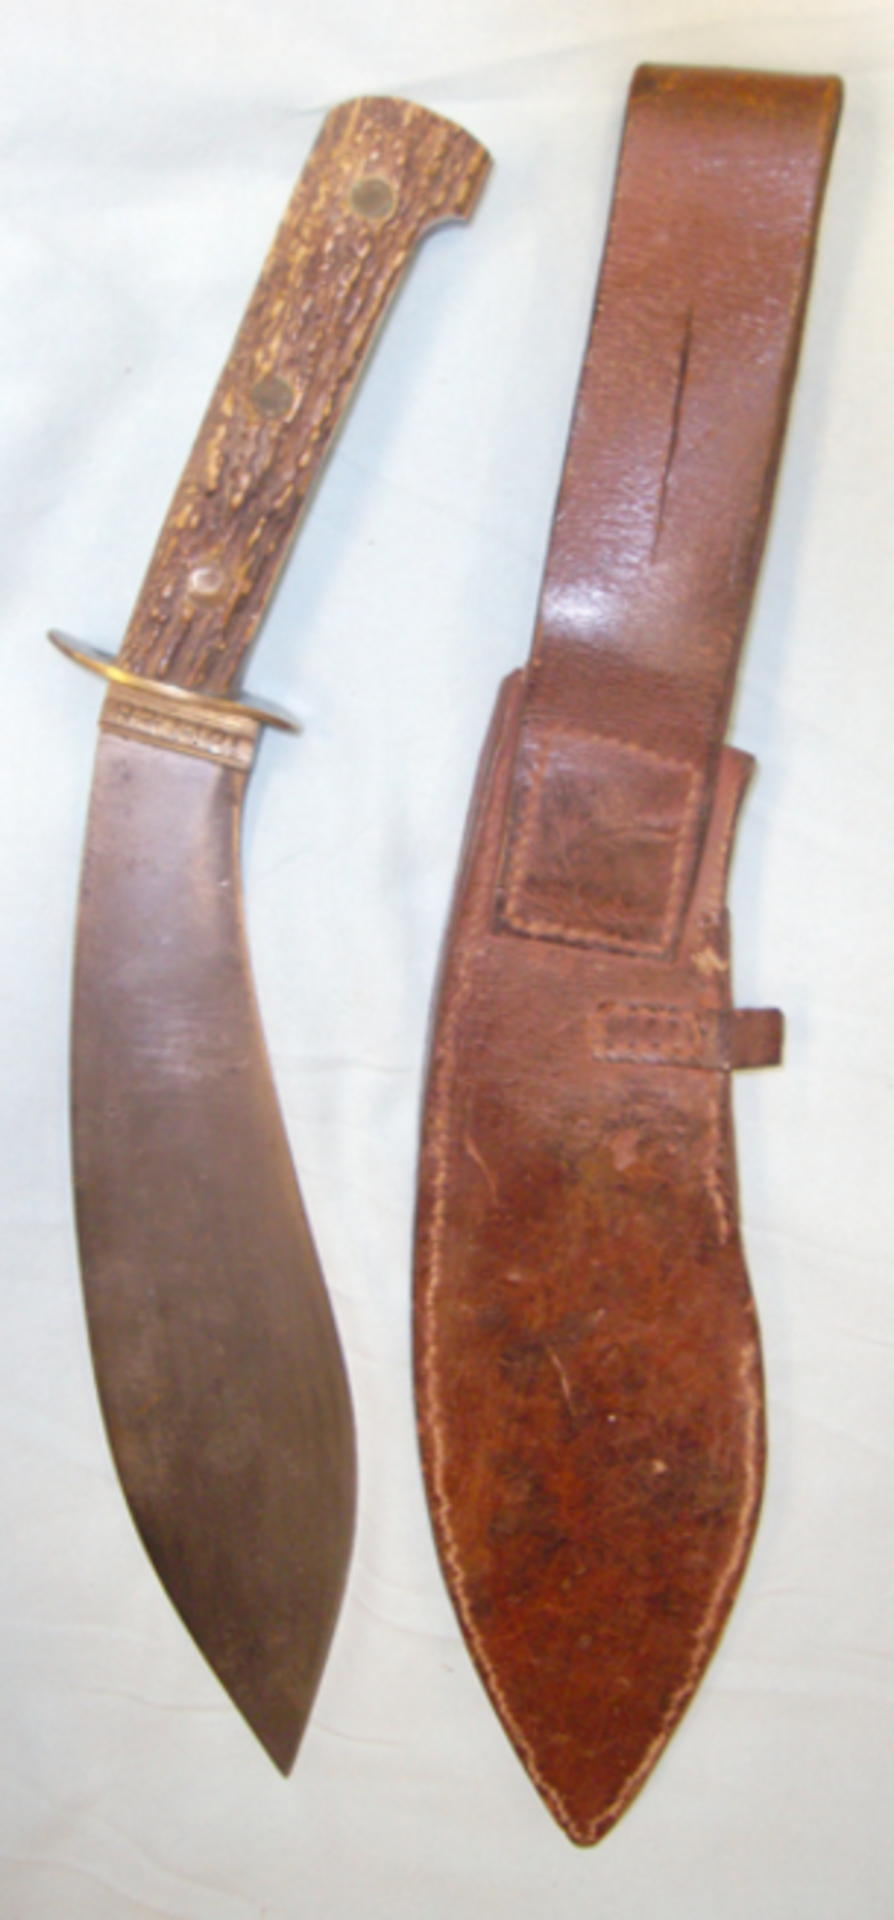 WW2 Chindit, Special Forces, Far East/ Burma Kukri Type Fighting Knife Marked 'Burma 12 (M) EB' - Image 3 of 3